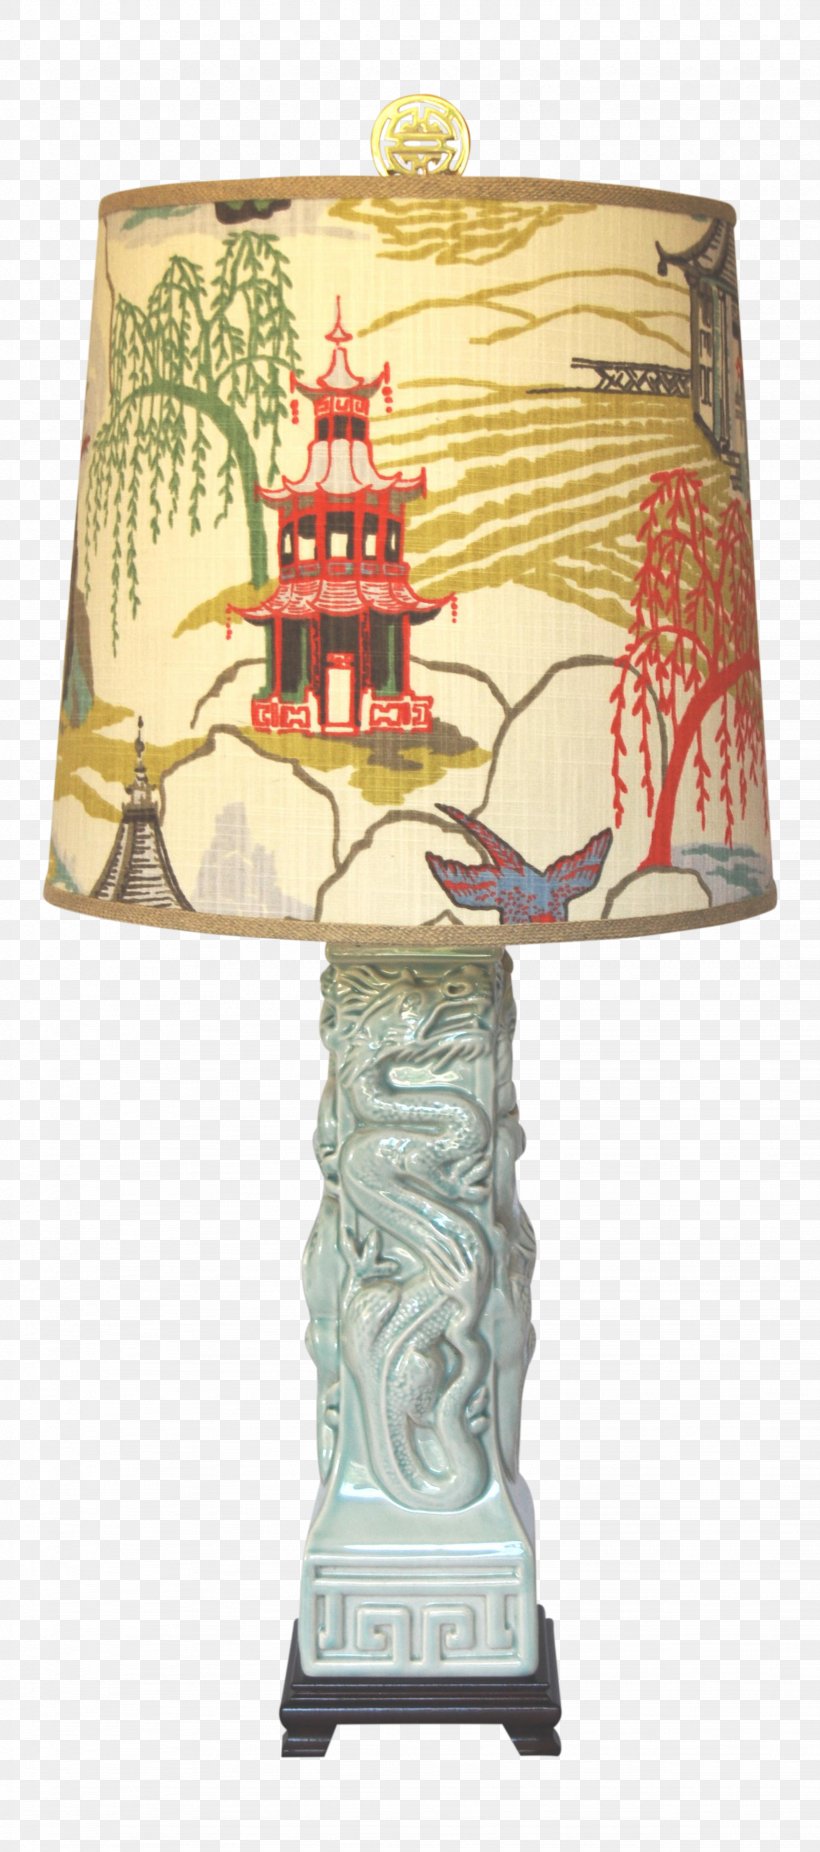 Lamp Shades Celadon Ceramic Chinoiserie, PNG, 1641x3708px, Lamp Shades, Celadon, Ceramic, Chairish, Chinoiserie Download Free